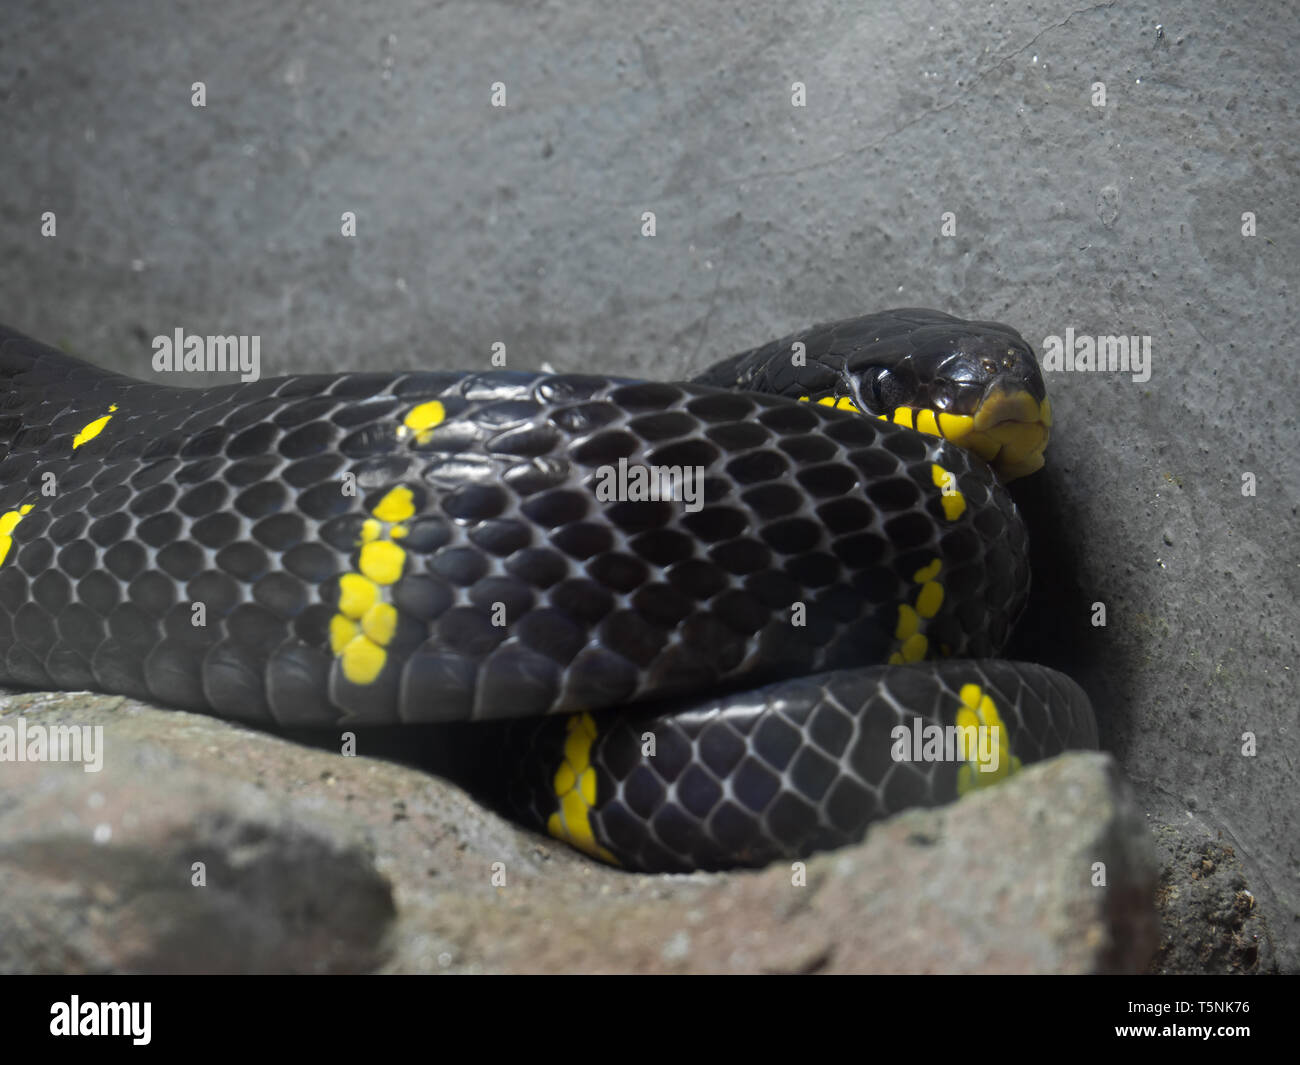 Closeup Mangrove Snake or Gold-Ringed Cat Snake Coiled on The Ground, Selective Focus Stock Photo